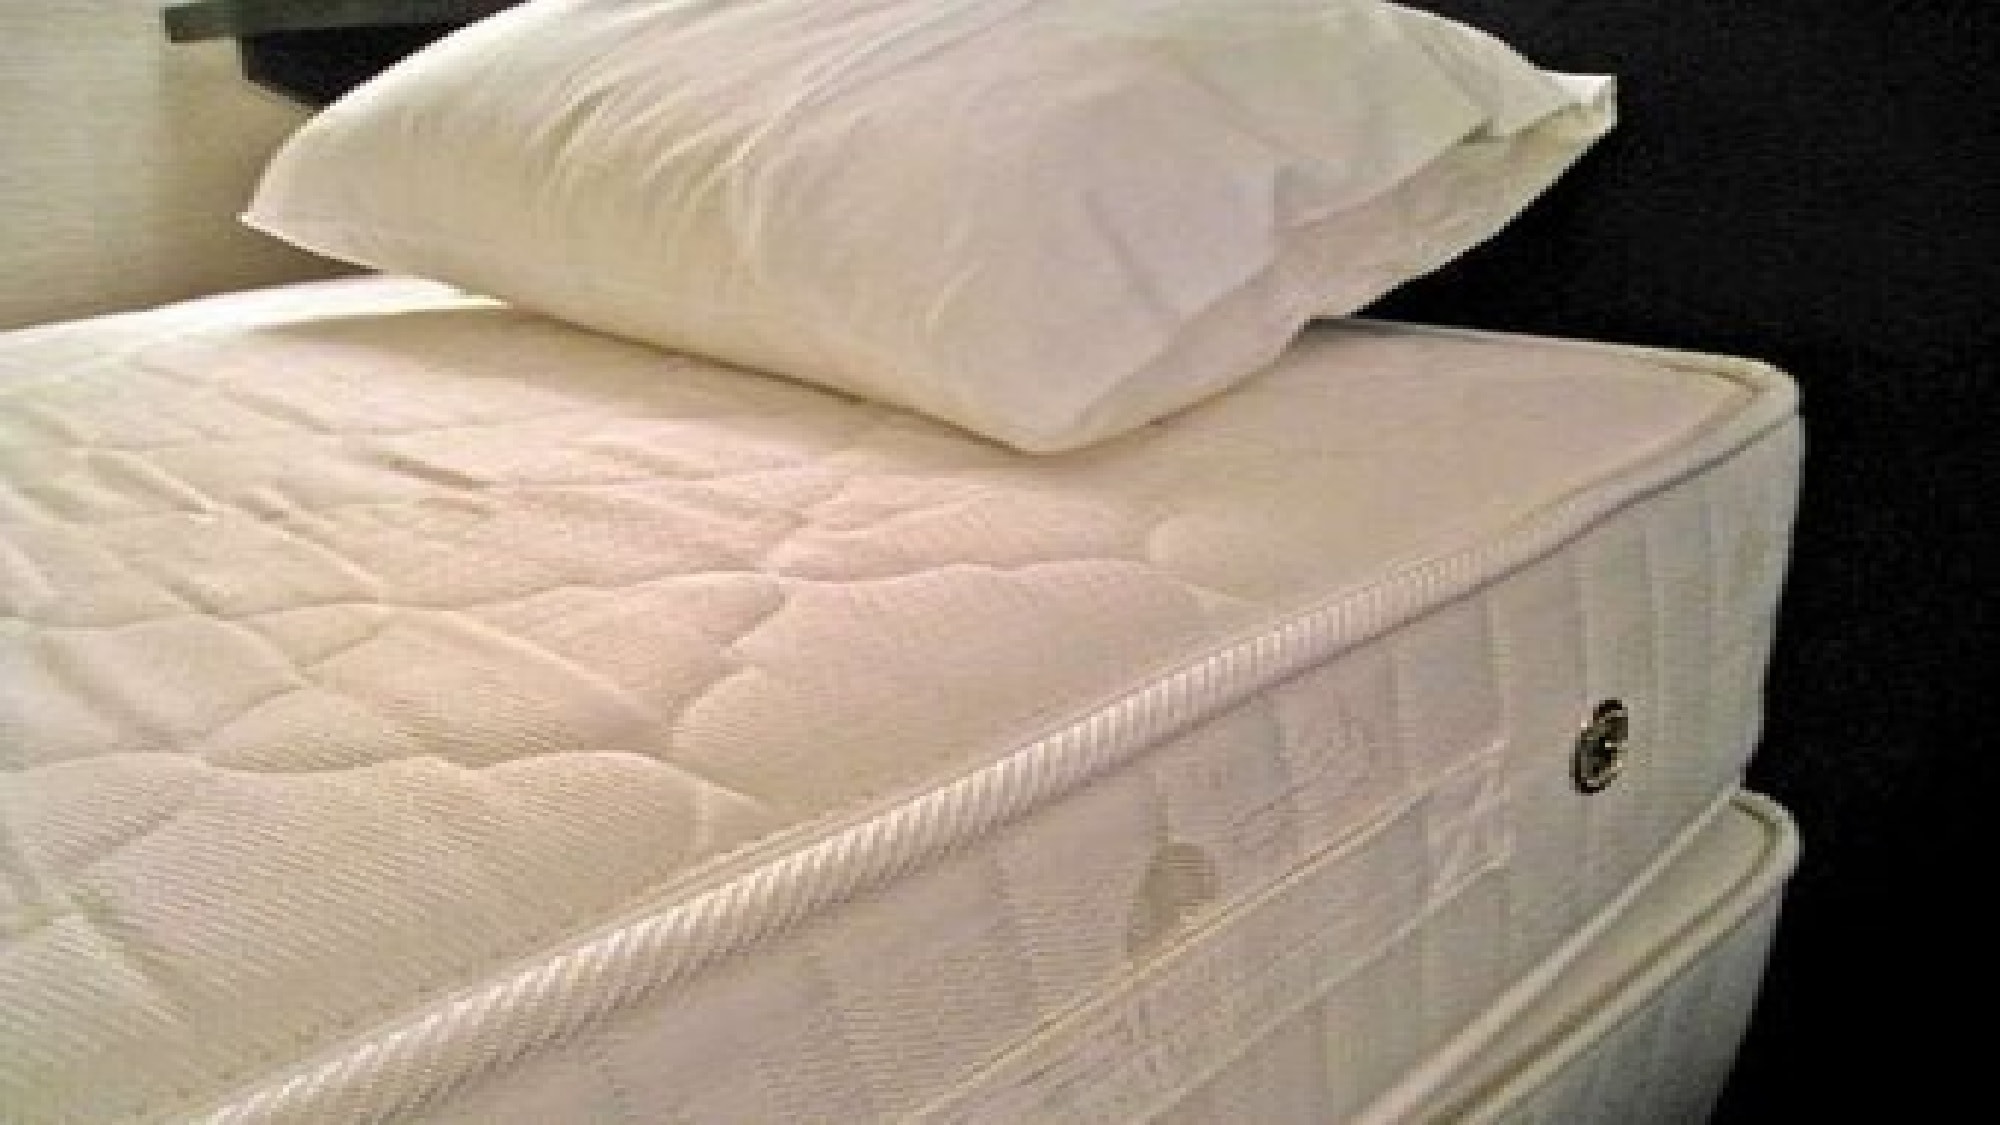 Luxury mattresses and pillows ♪ Use original bed mats ♪ Have a good night's sleep!